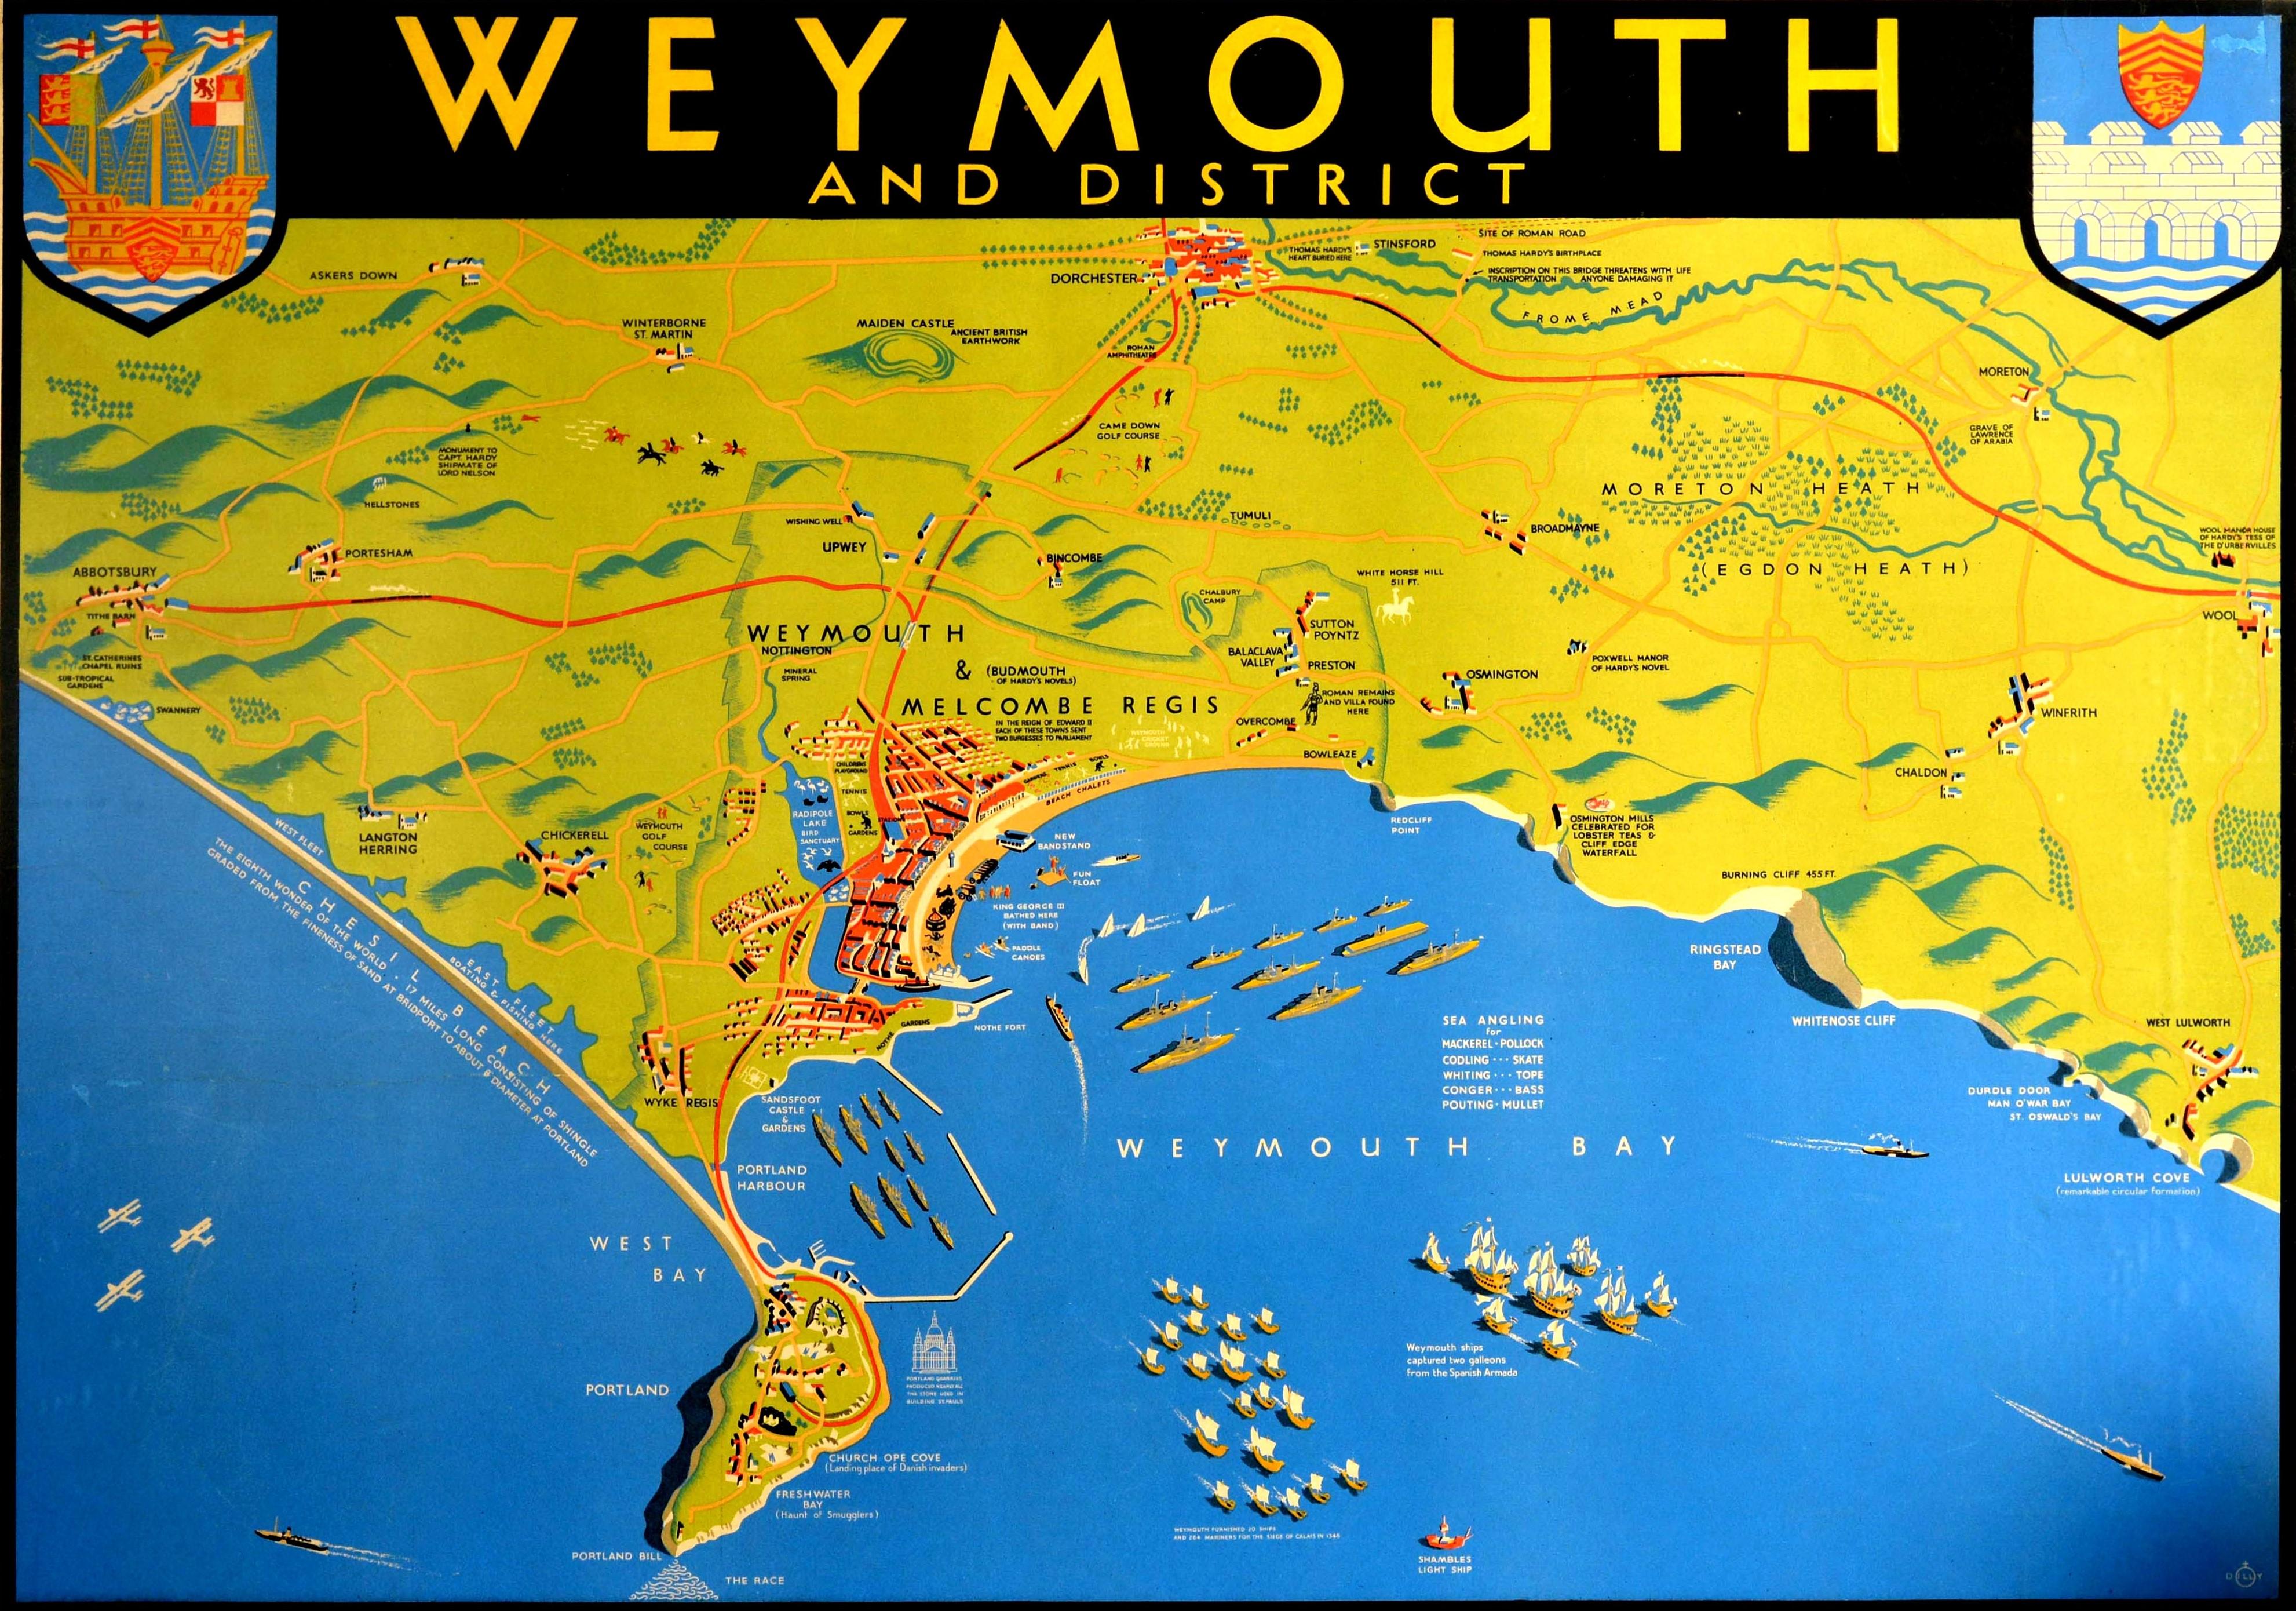 Original Vintage Poster Weymouth Great Western Railway Southern Train Travel Map - Print by Dilly